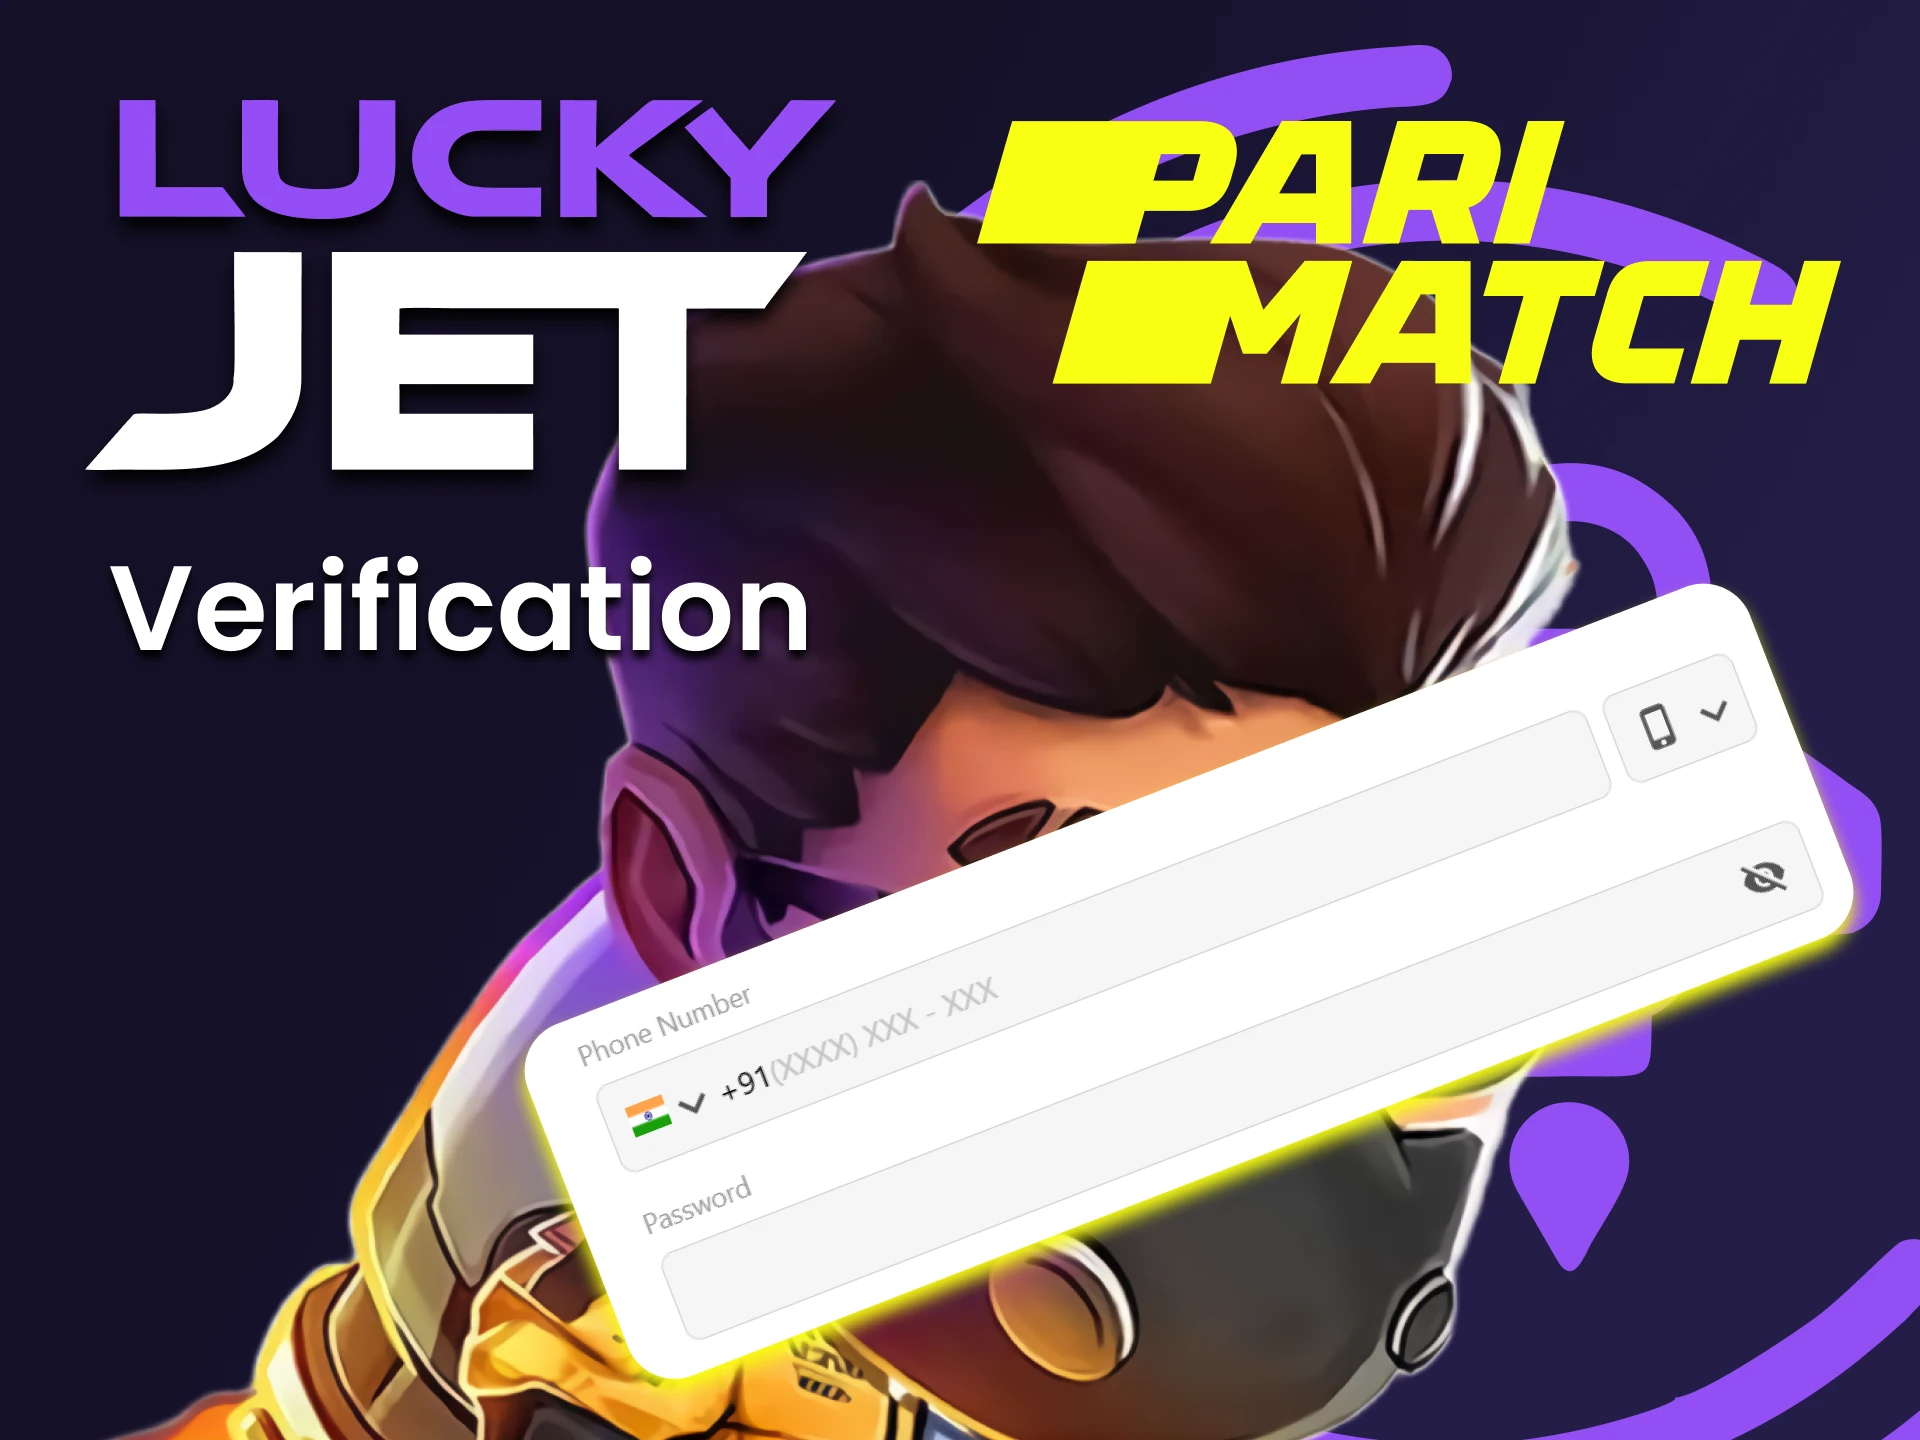 Fill in the correct personal data on Parimatch to play Lucky Jet.